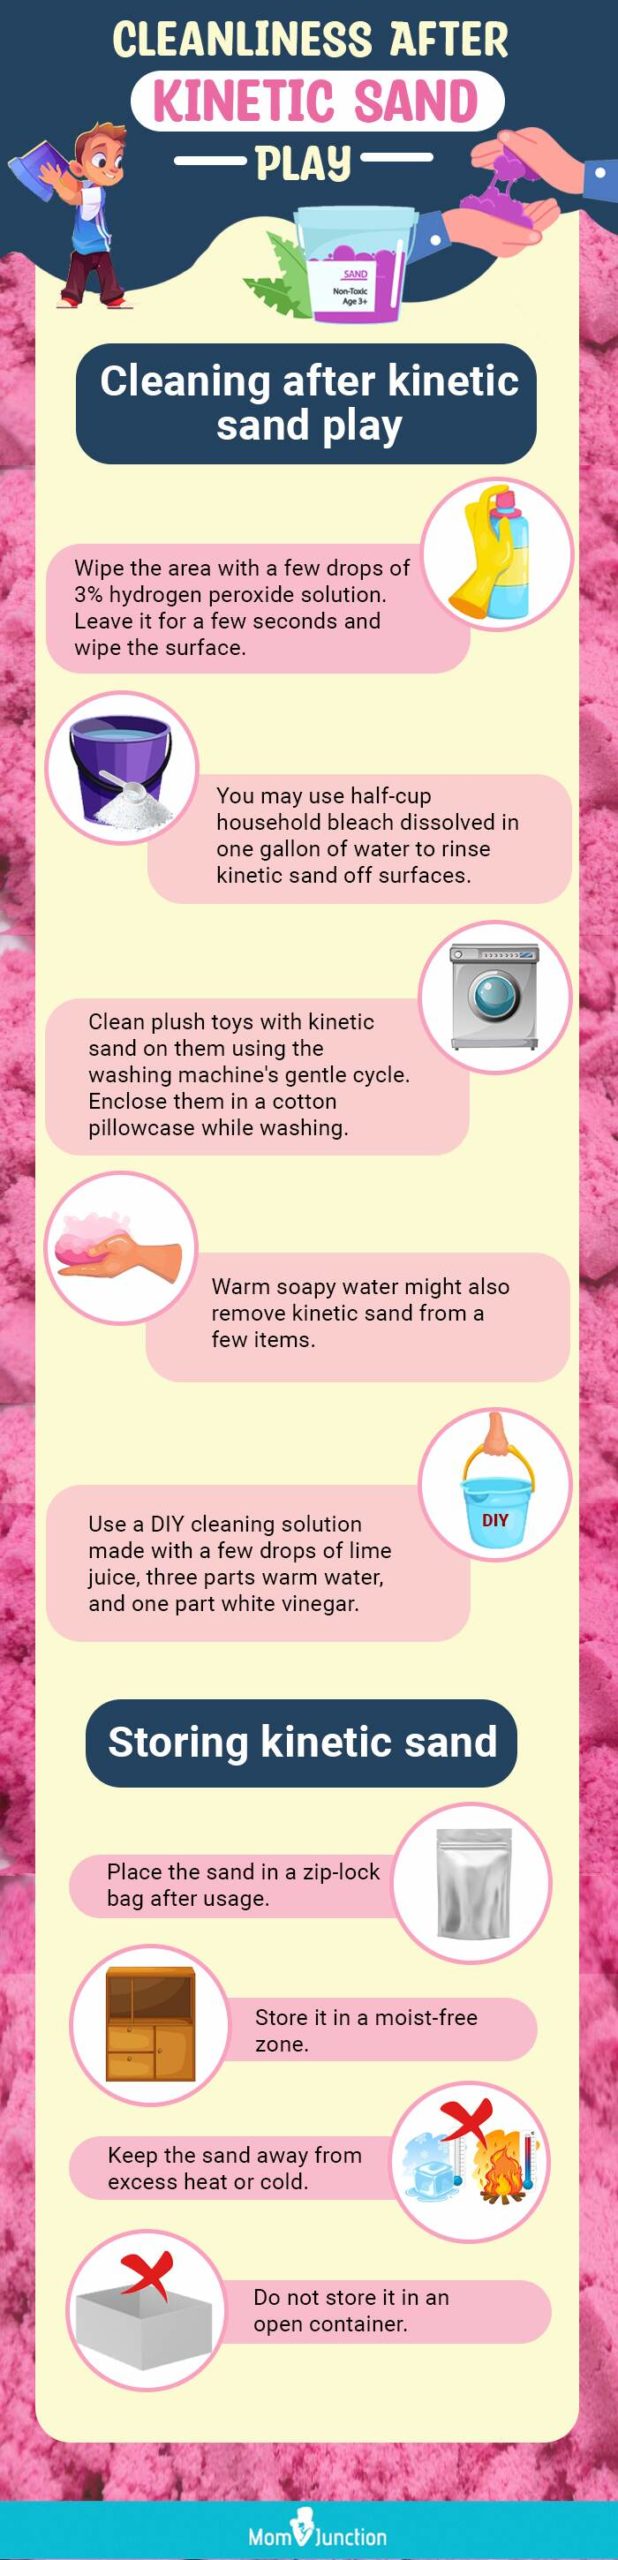 cleaning after kinetic sand play [infographic]